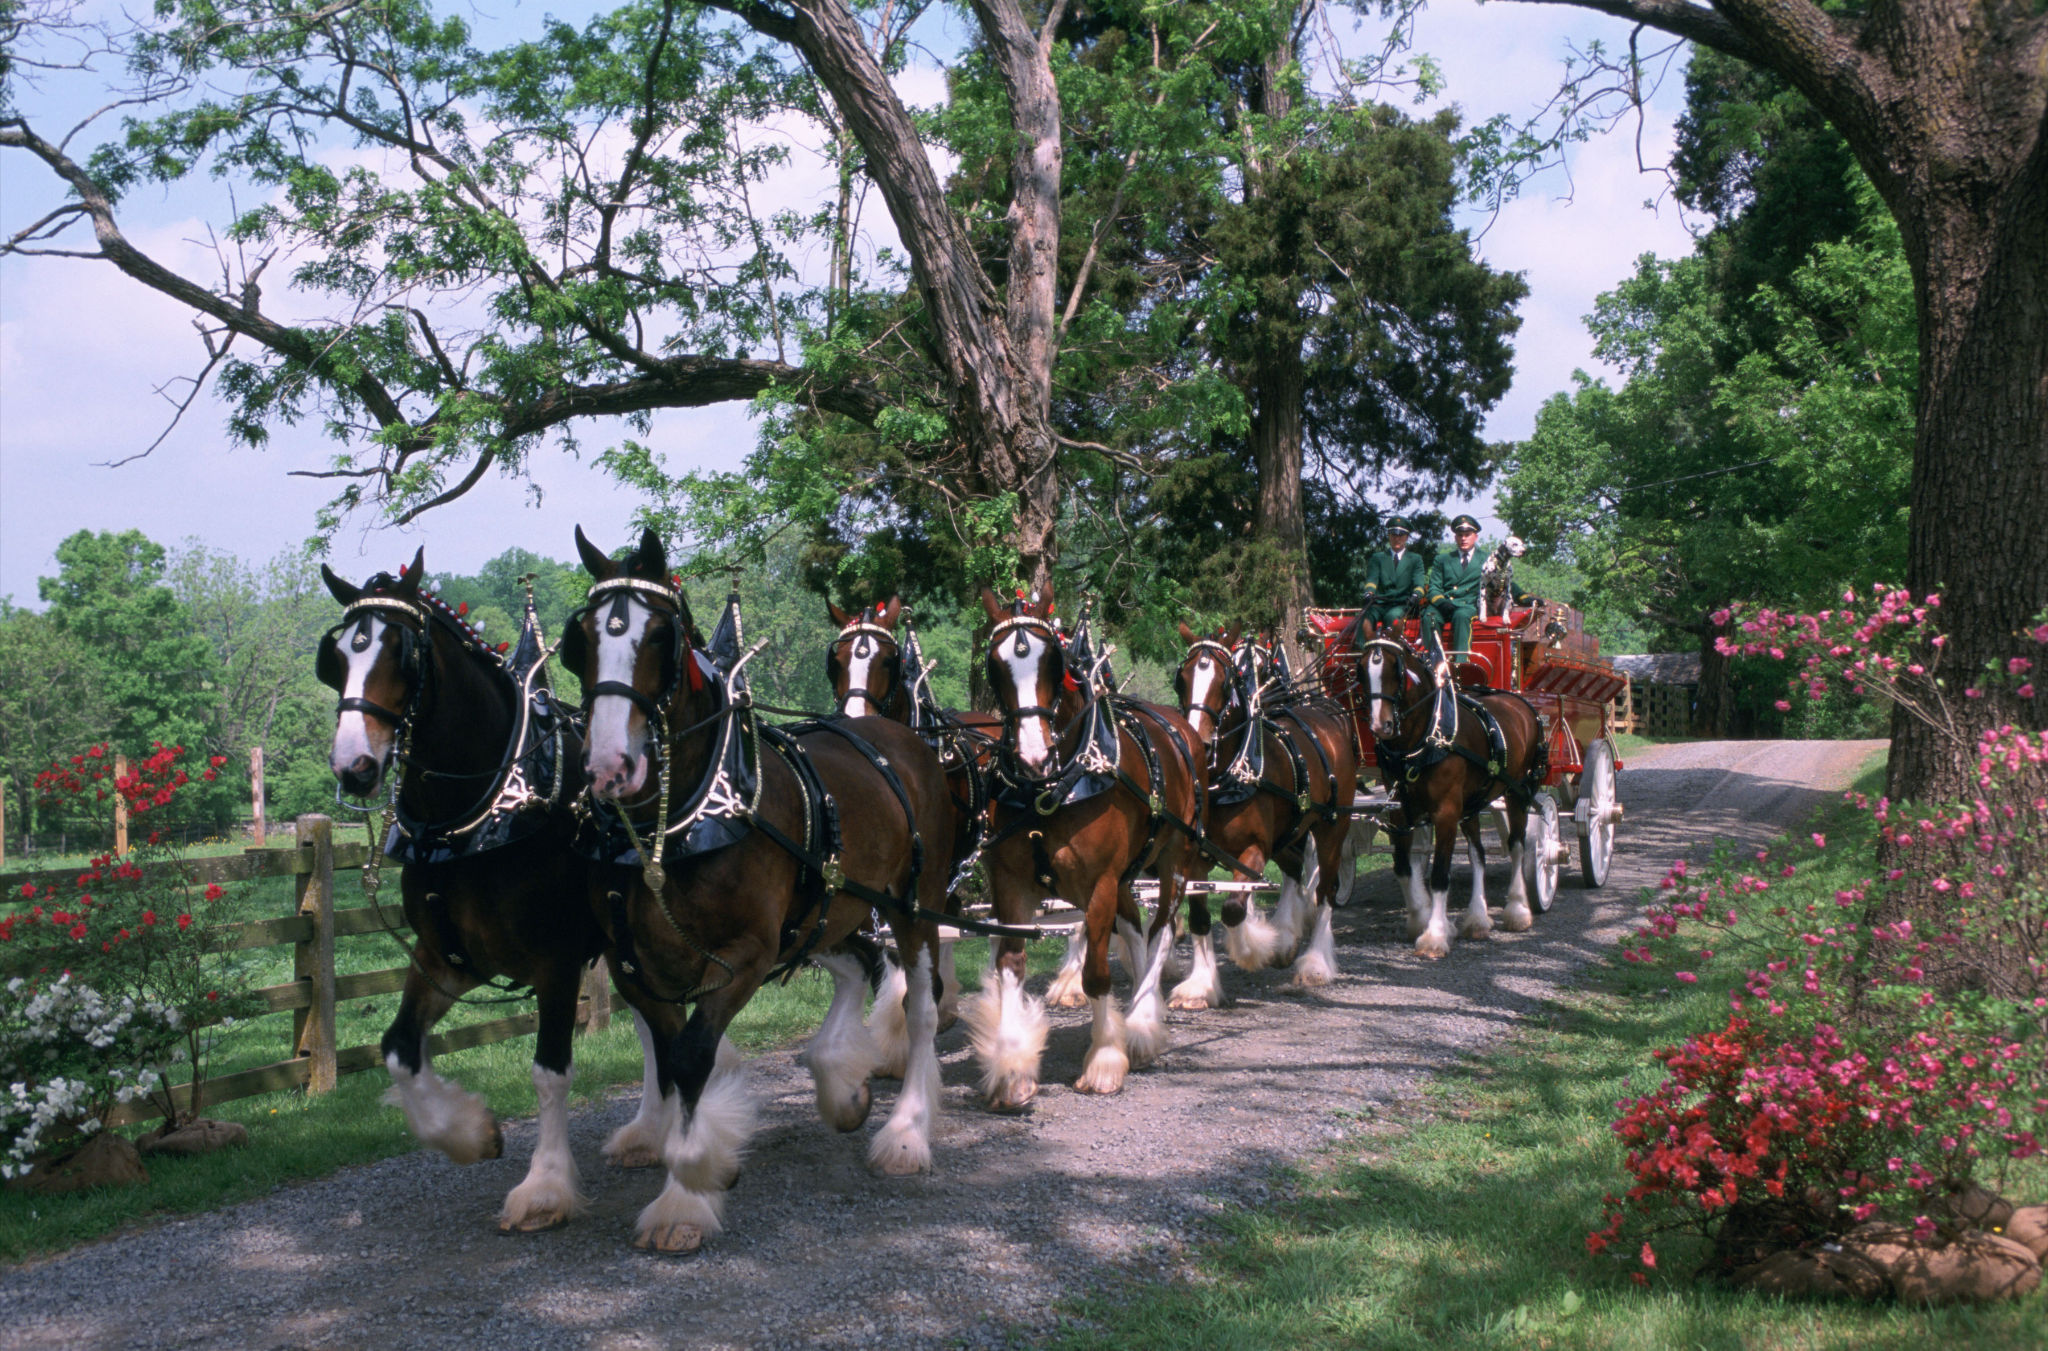 Budweiser Clydesdale Horses Wallpaper Budweiser clydesdales image